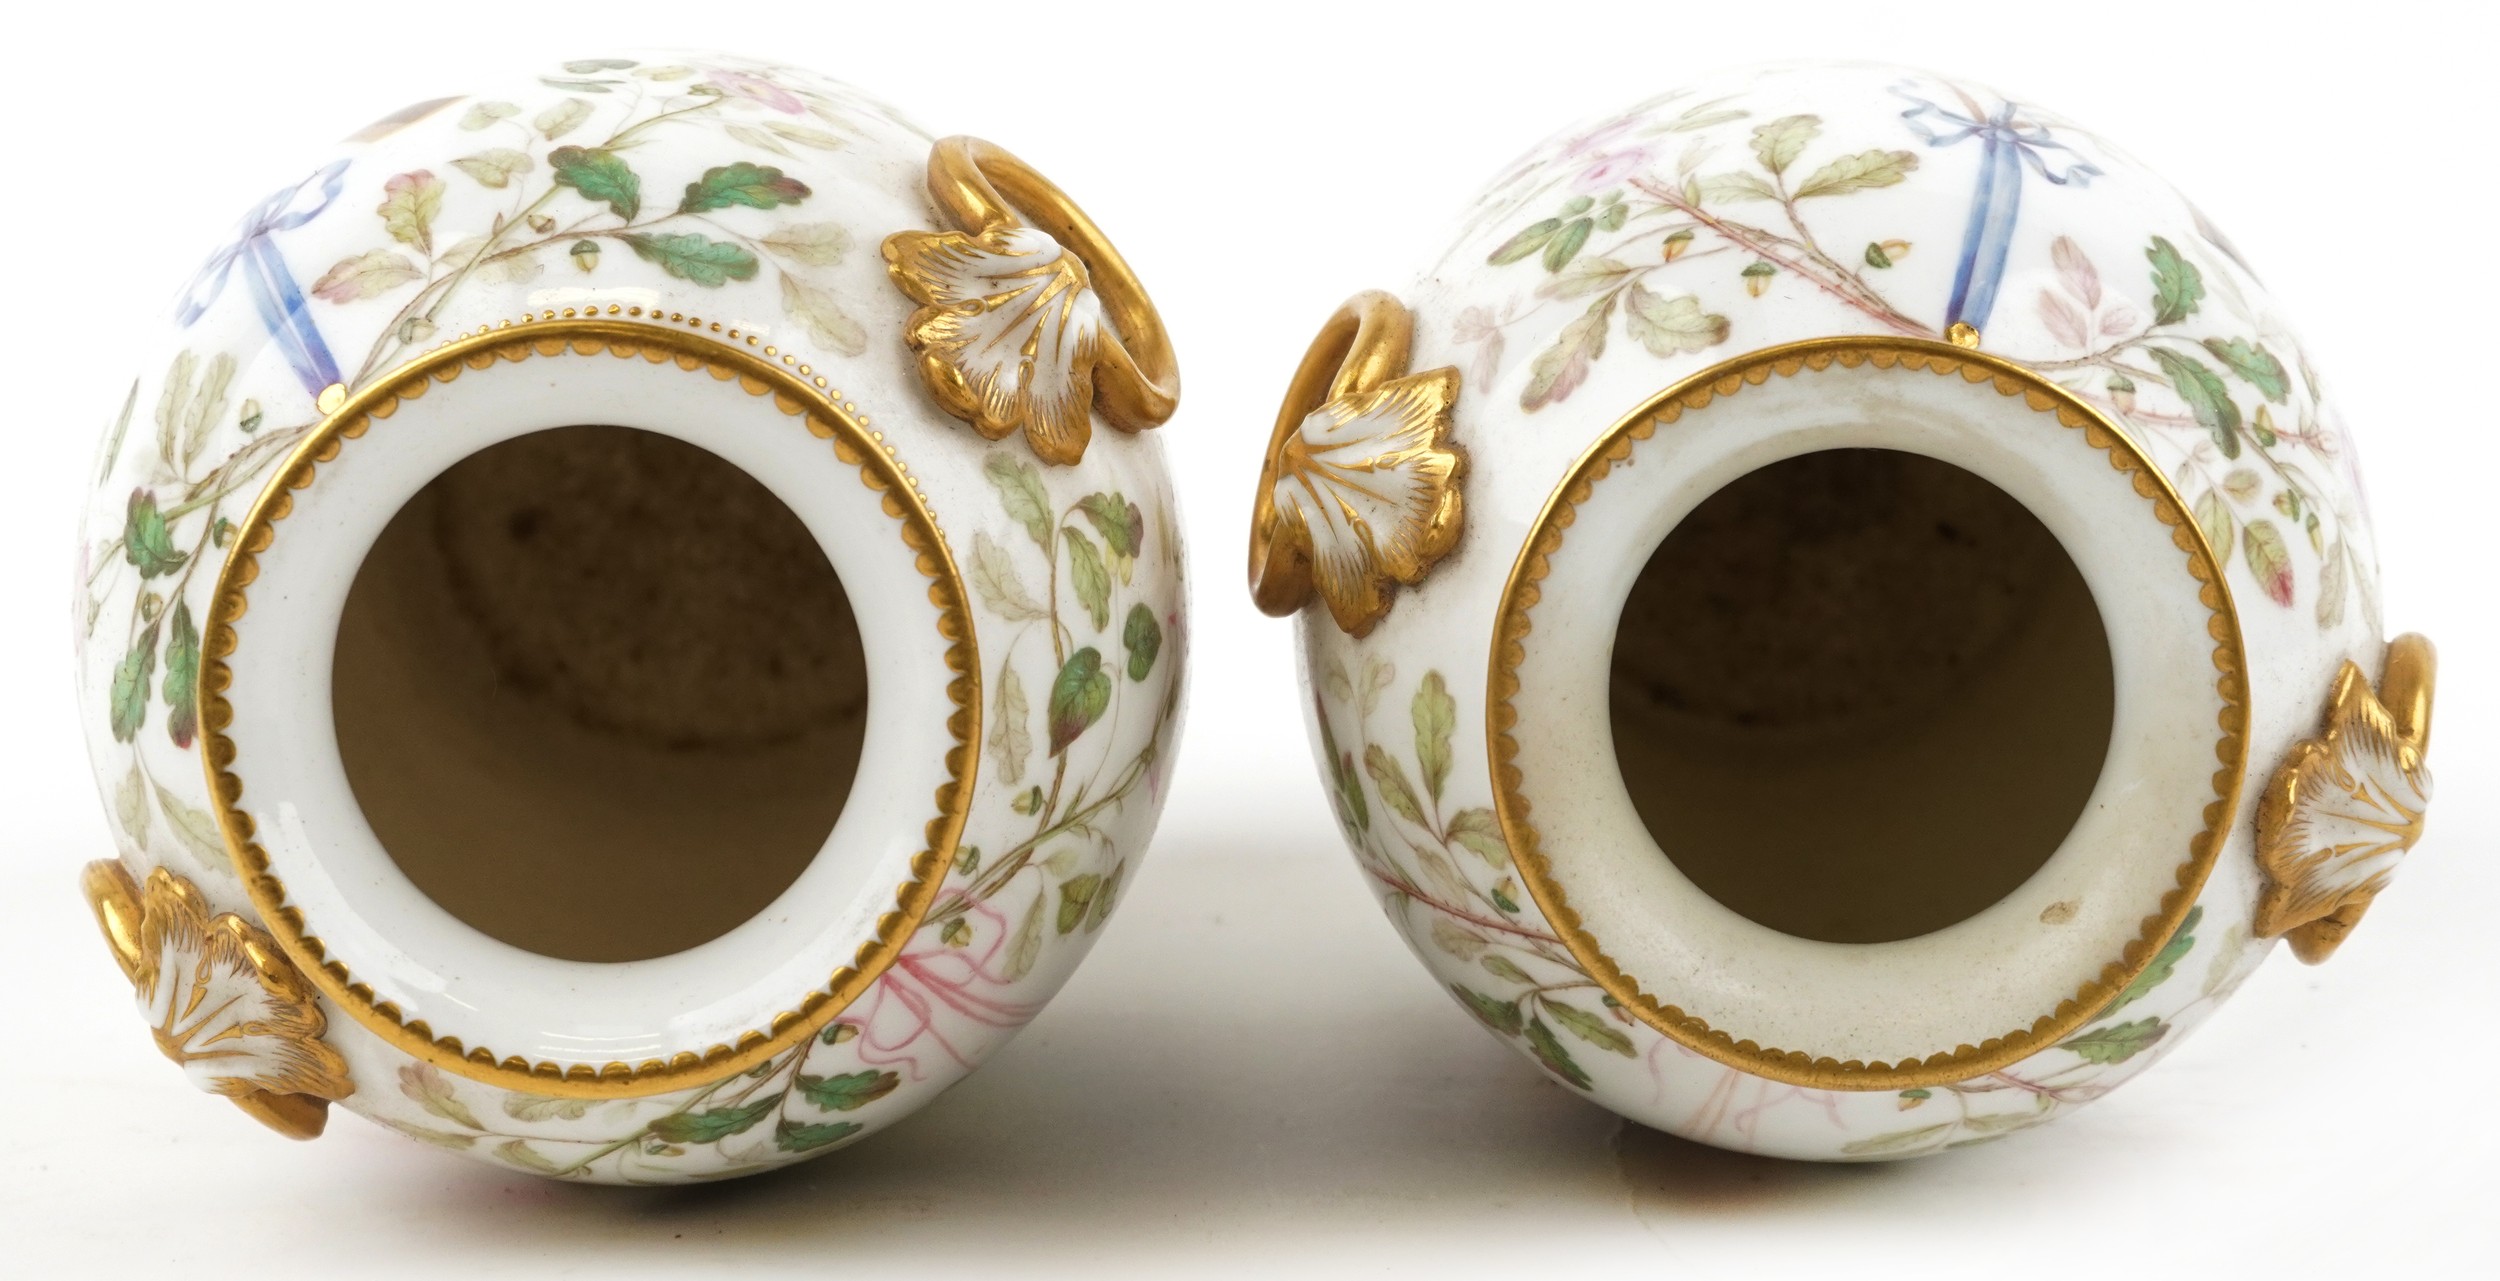 Pair of 19th century European porcelain vases with ring turned handles hand painted with hanging - Image 3 of 4